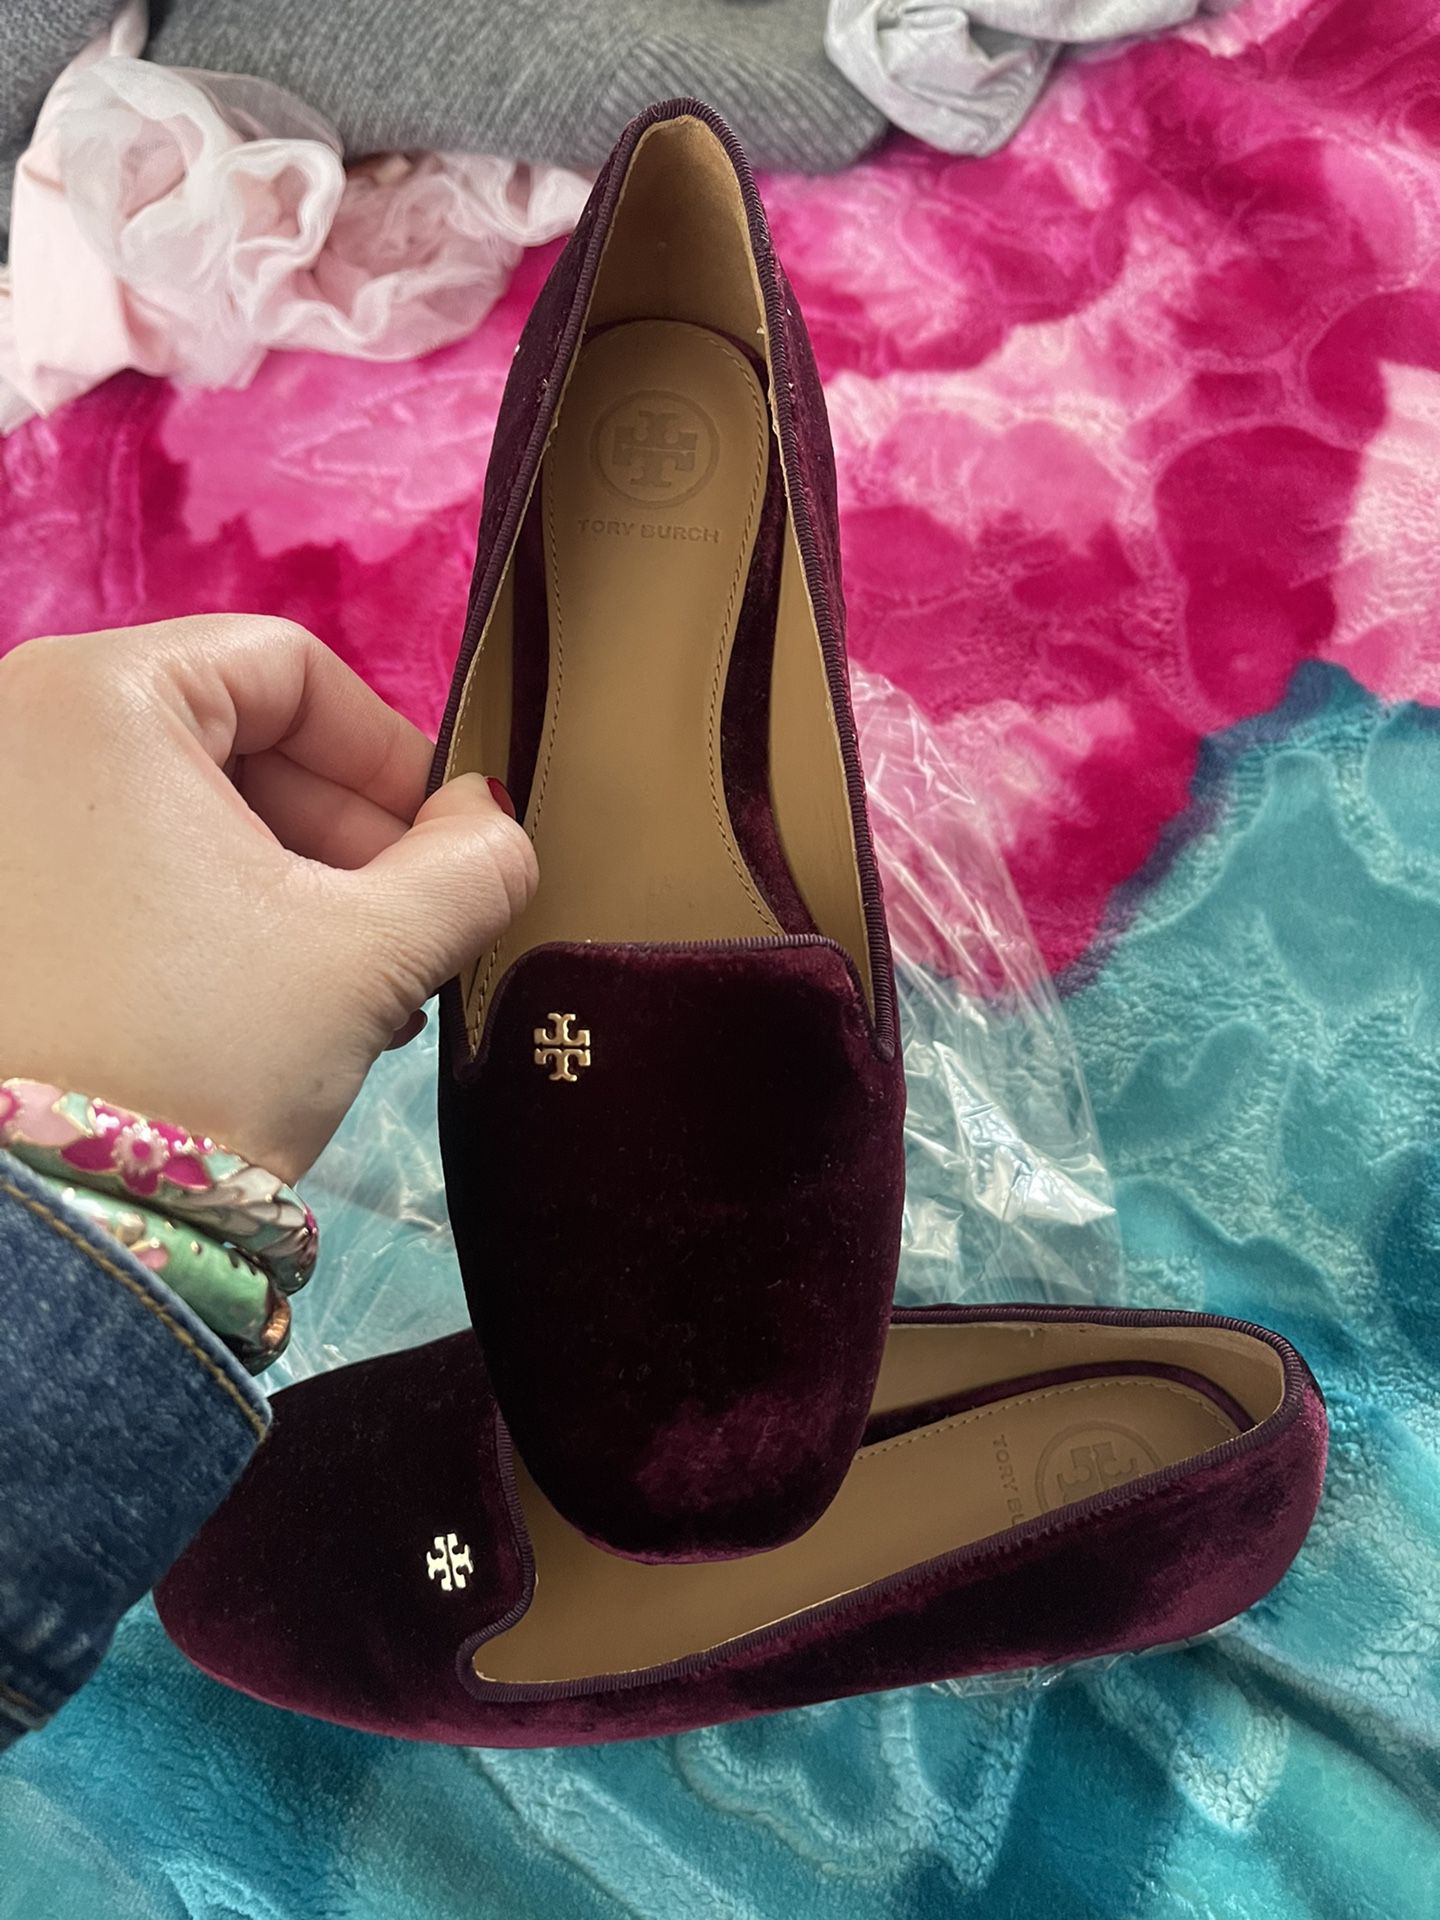 Tory Burch Shoes Suede New With Tags for Sale in Pasadena, CA - OfferUp